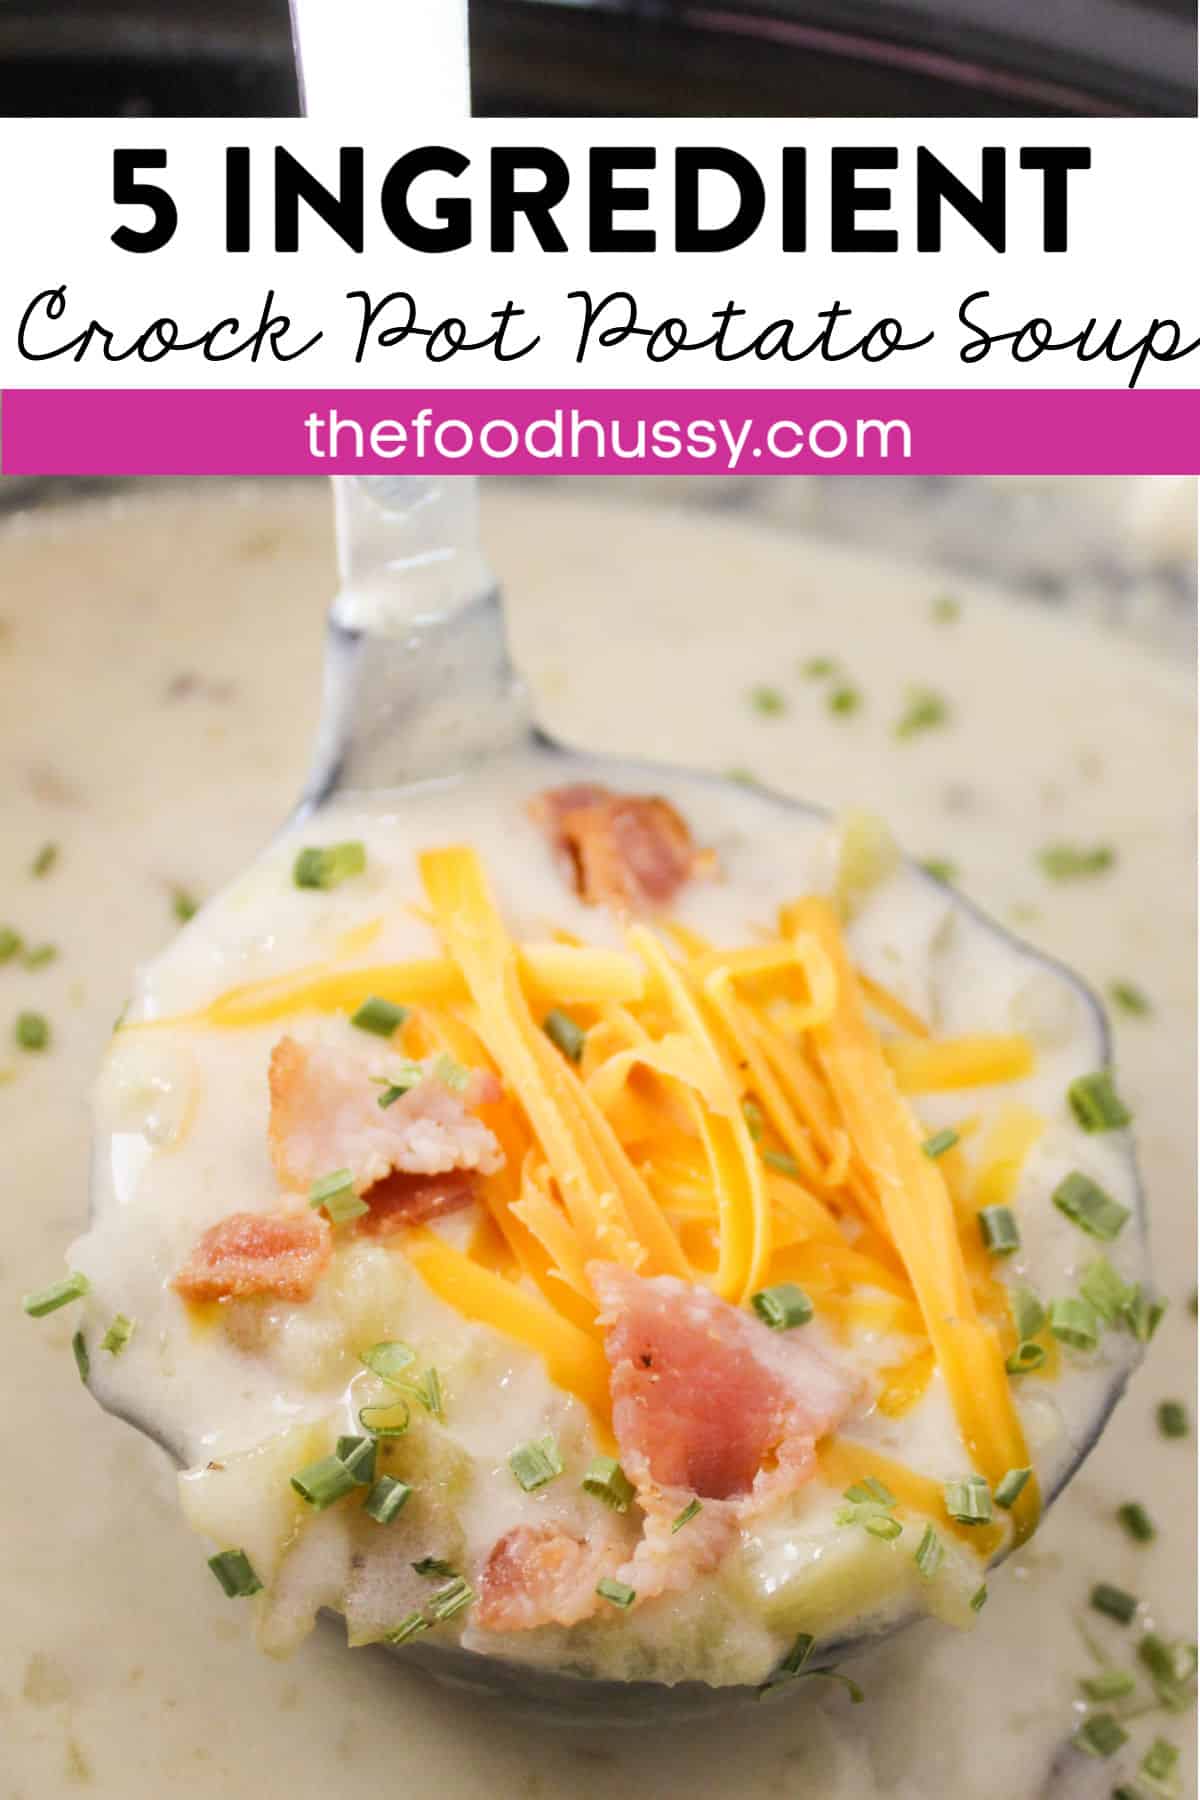 This 5 Ingredient Crock Pot Potato Soup is creamy, chunky and delicious! This is an easy potato soup recipe that tastes so good and the whole family will love - and it's all done in one pot! via @foodhussy